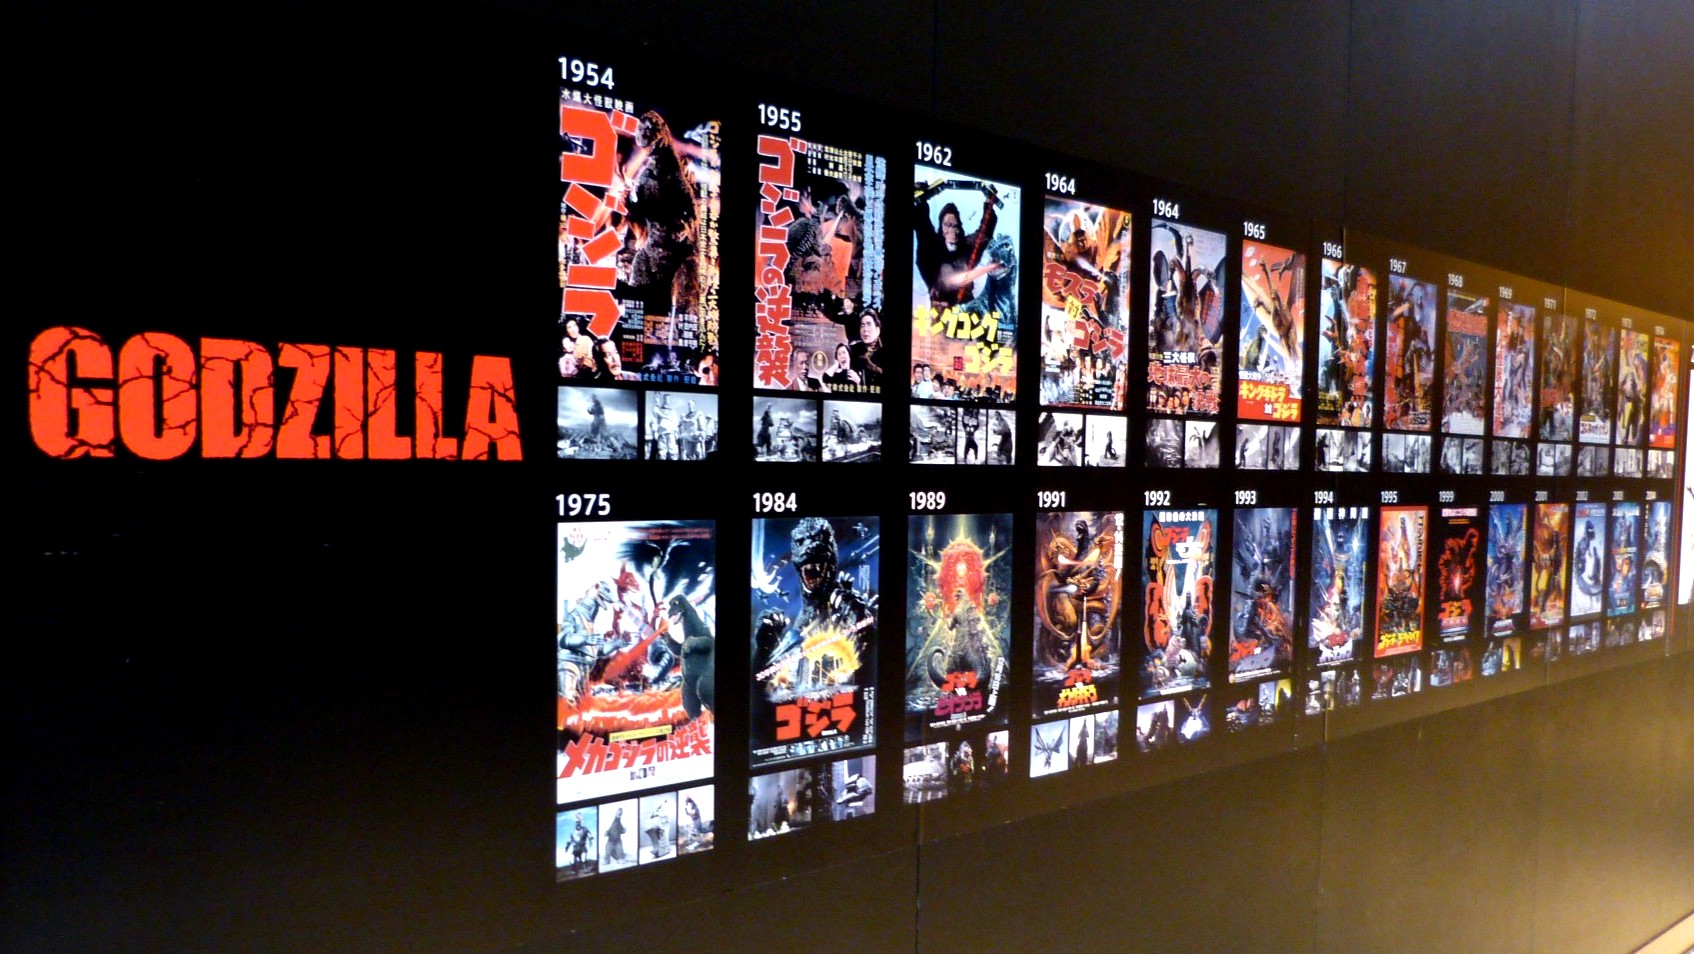 godzilla movie posters line a hallway, except for the US film